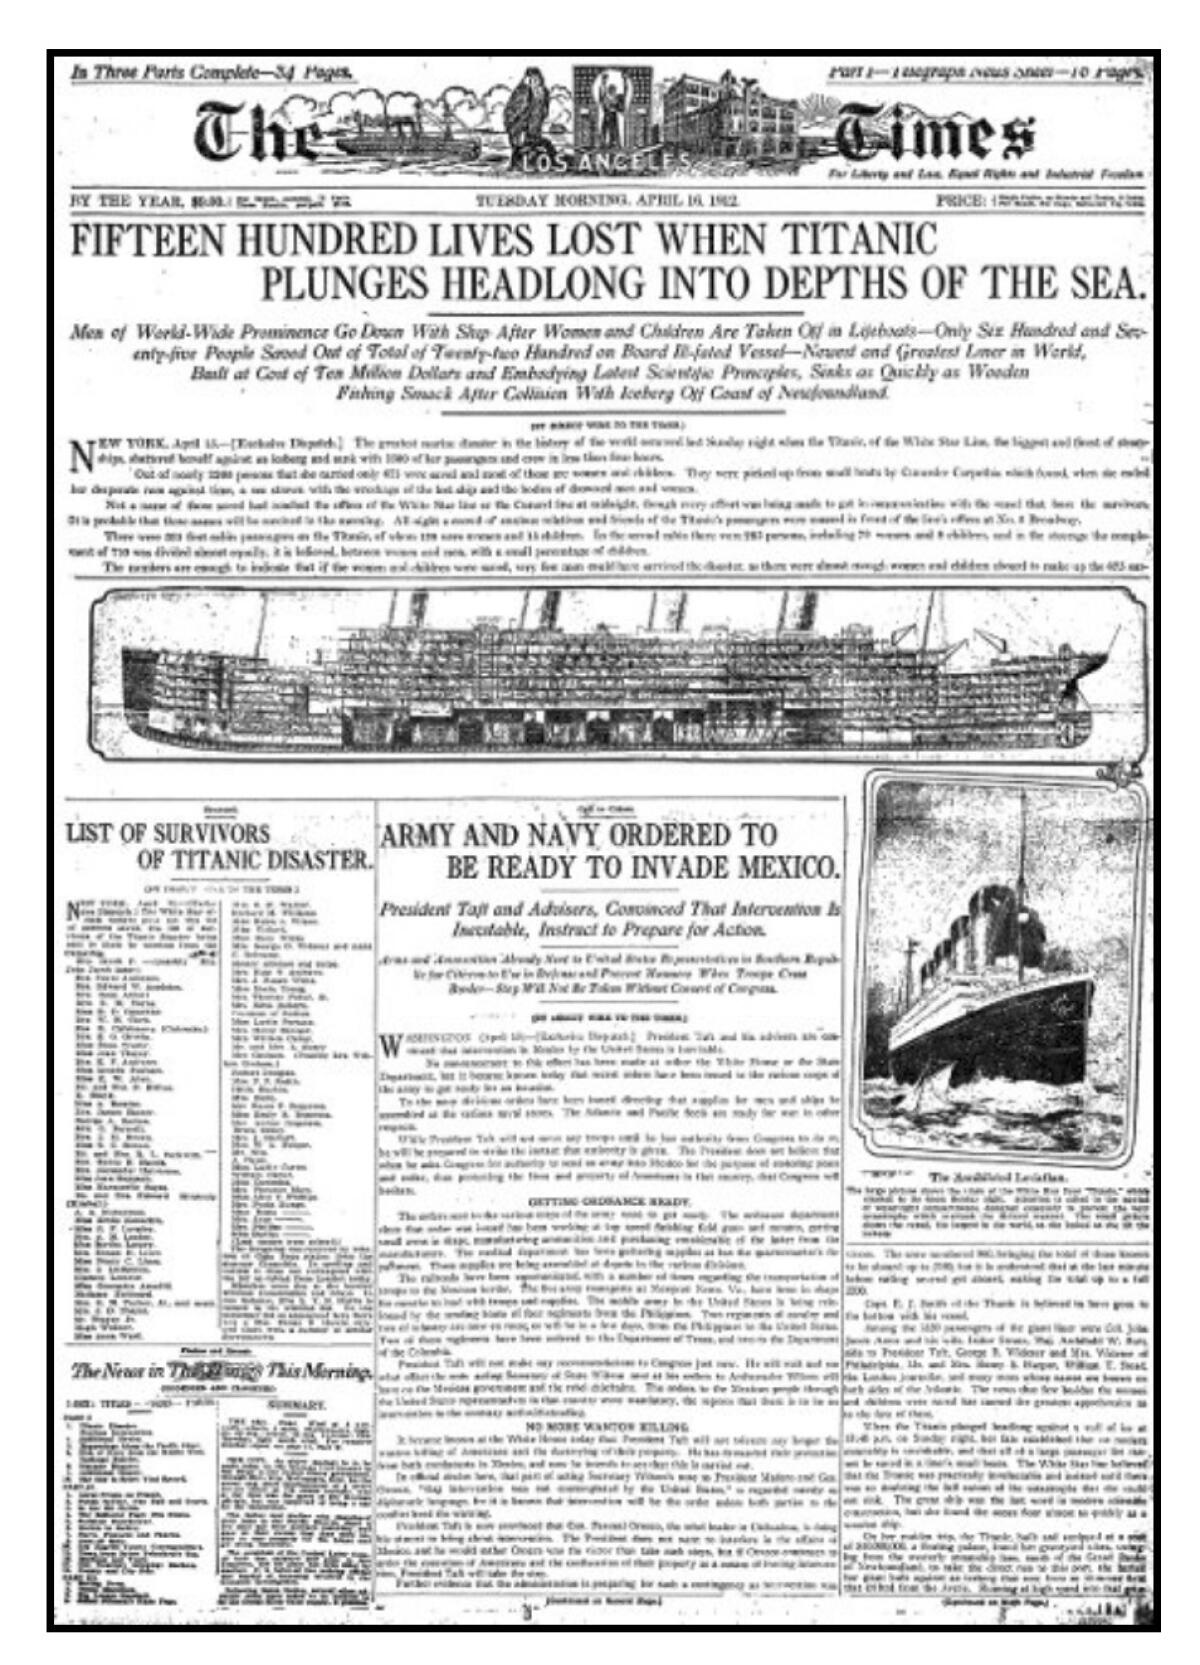 The April 16, 1912, front page of the Los Angeles Times on the sinking of the RMS Titanic.